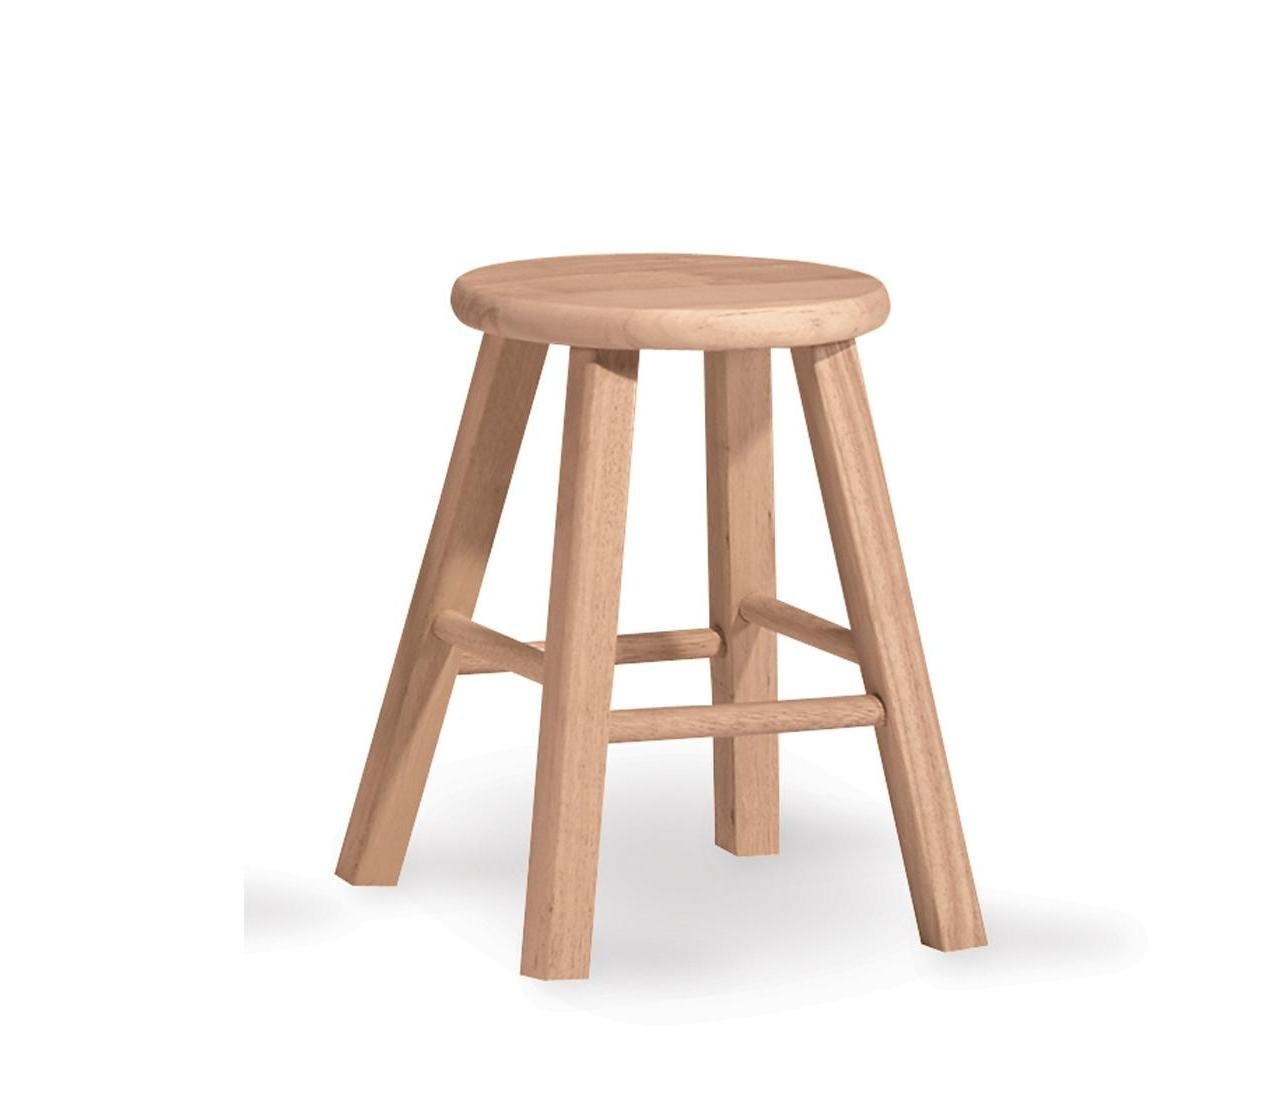 International Concepts 1S-518 18-Inch Round Top Stool, Unfinished